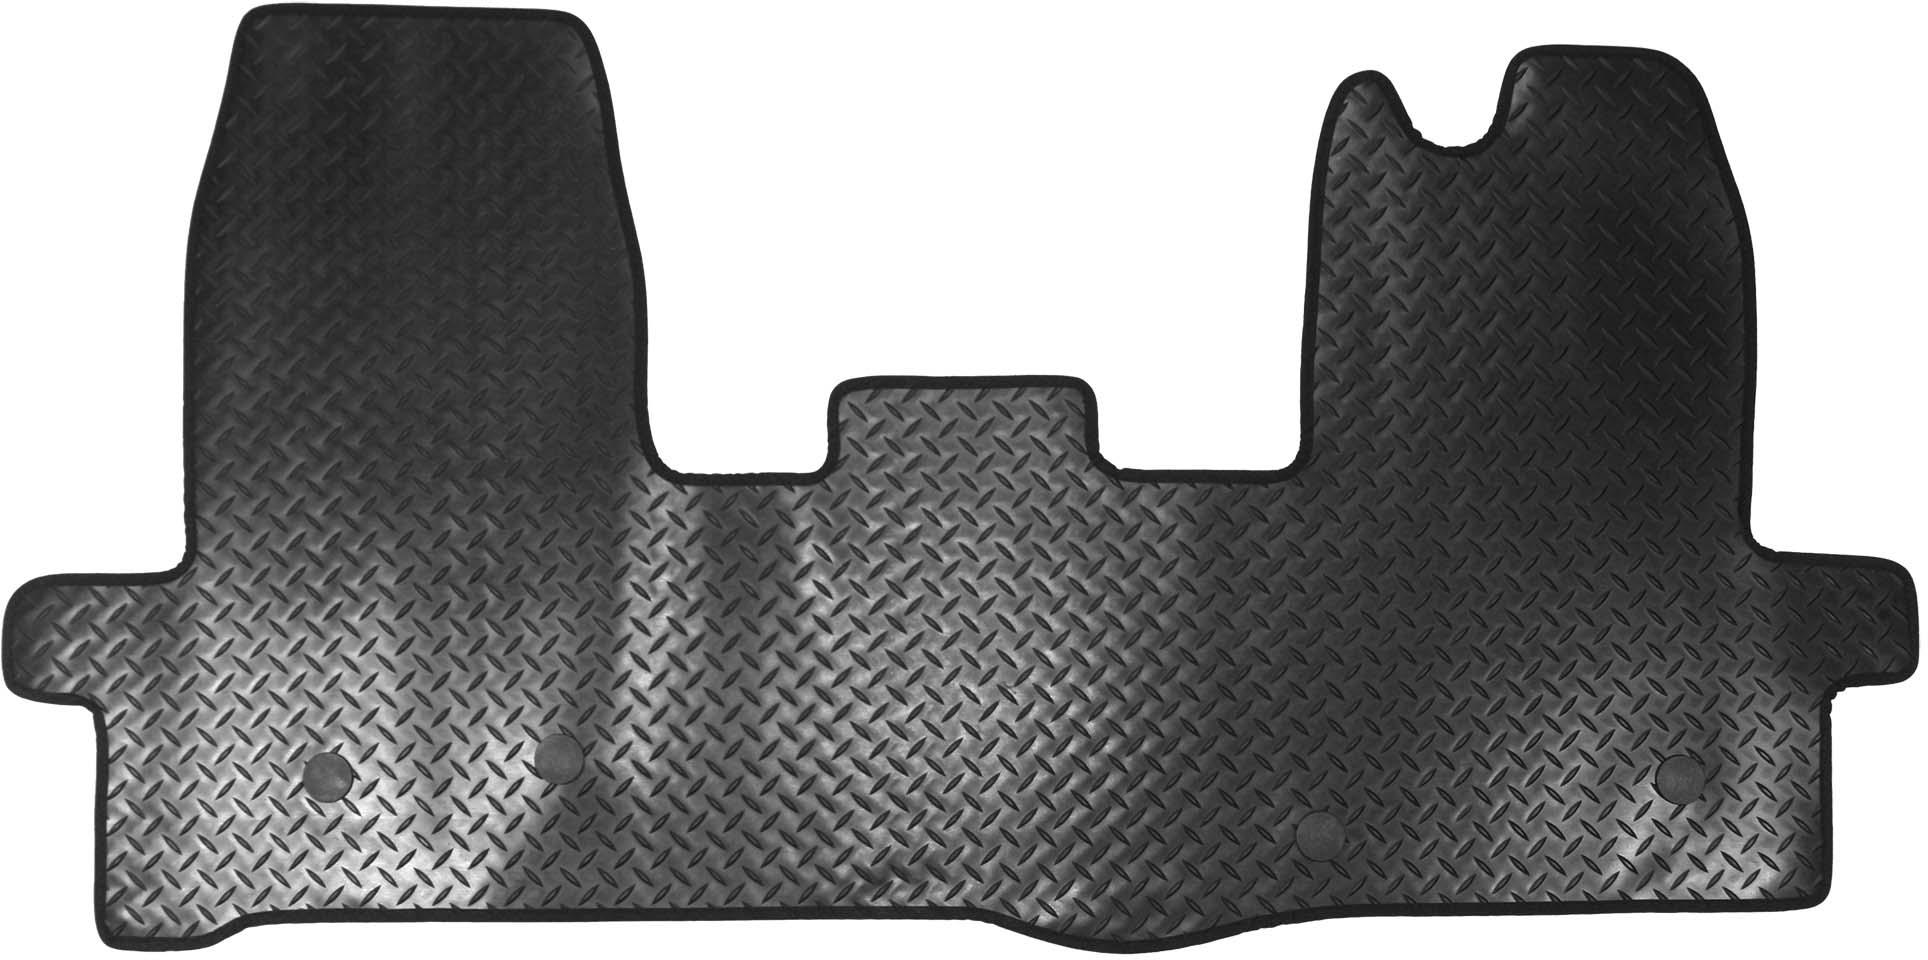 Halfords Ford Transit - Rubber Van Mat 4 Clips (Ww5052)